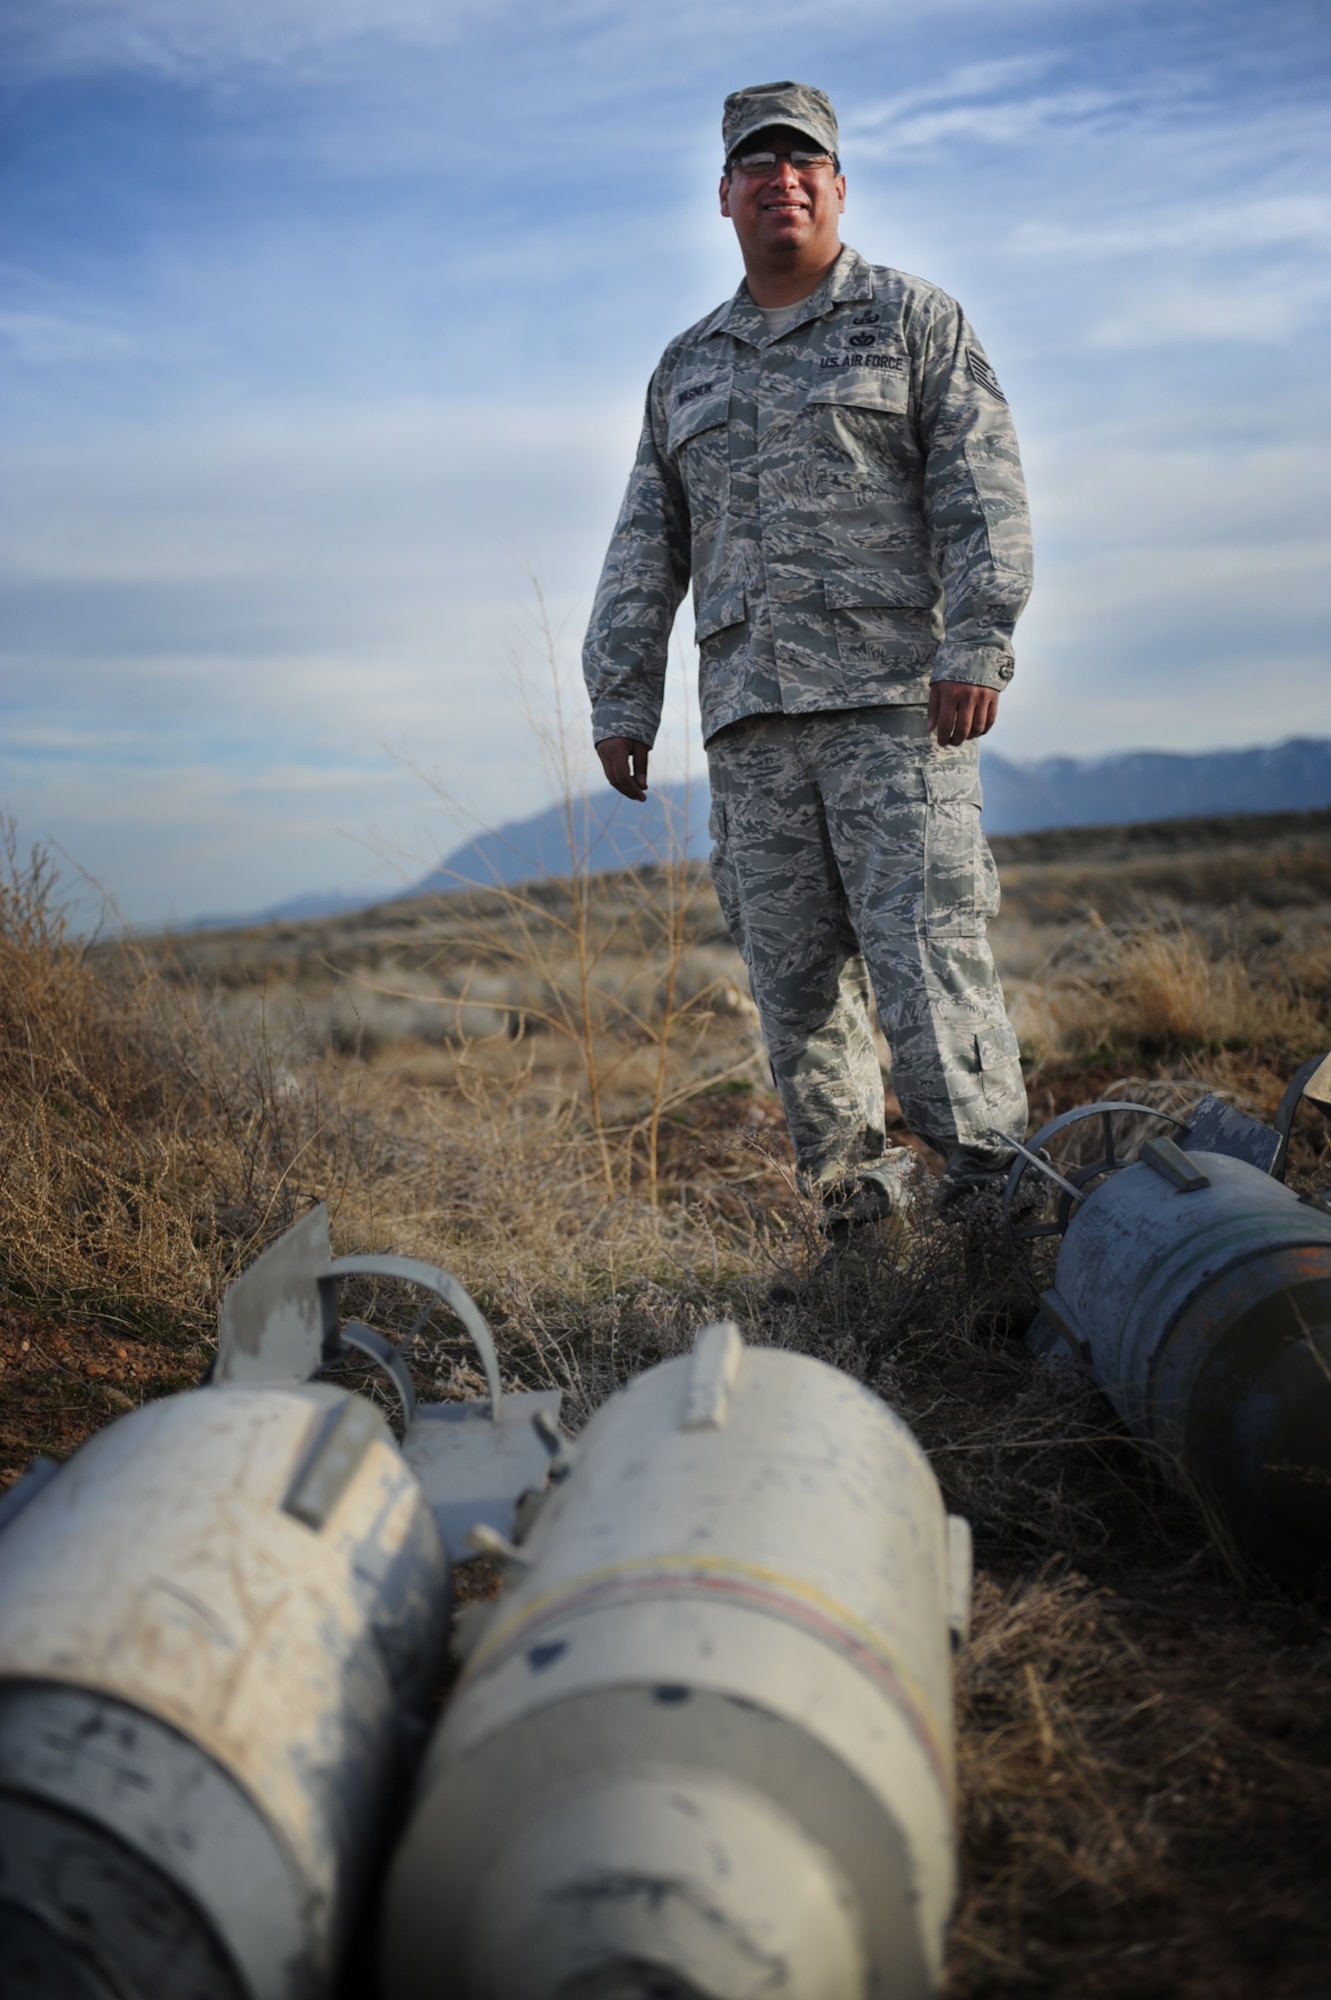 Tech. Sgt. Gabriel Wasnuk, an explosive ordnance technician with the 775th EOD flight at Hill AFB, Utah is set to receive a purple heart March 25 for brain injuries sustained during combat deployments to Iraq and Afghanistan. (U.S. Air Force/Micah Garbarino)